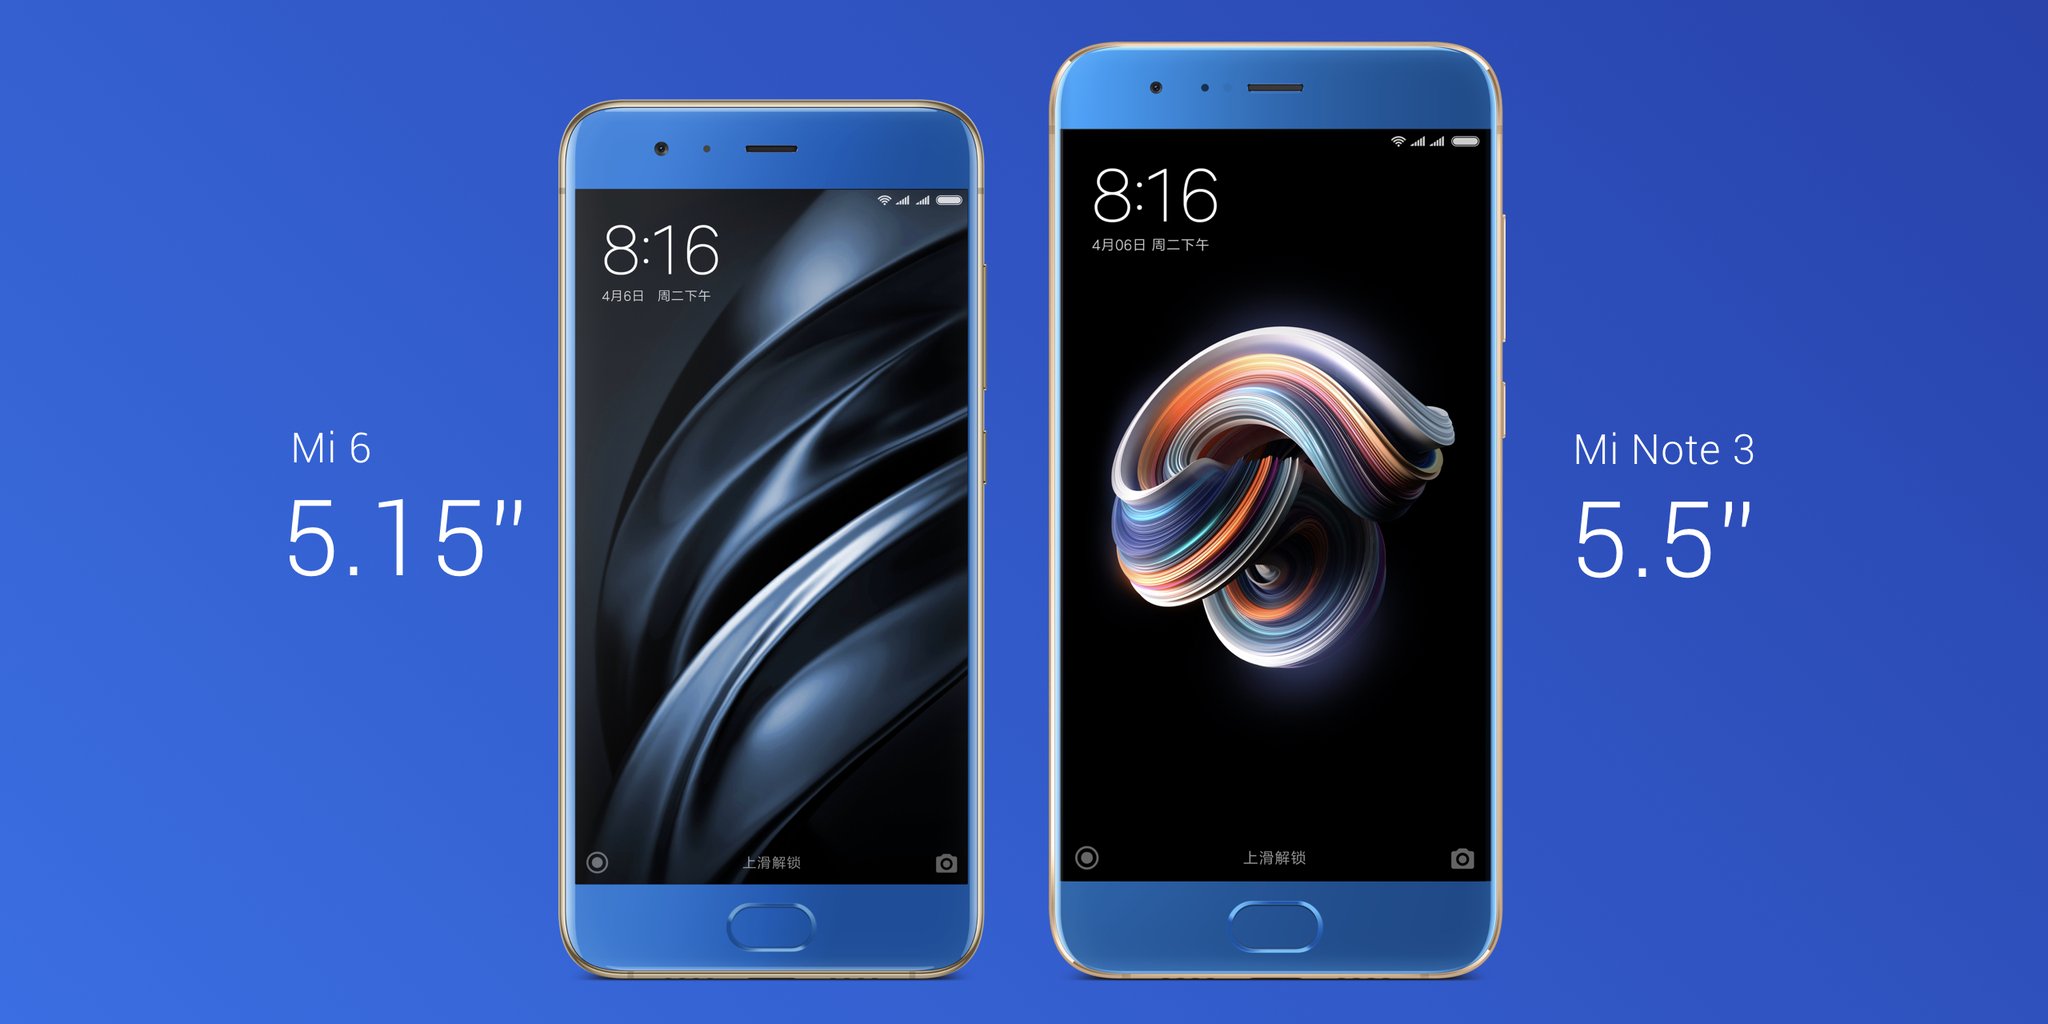 Xiaomi Mi Note 3 Announced: Basically A Larger Mi 6 With Better ...